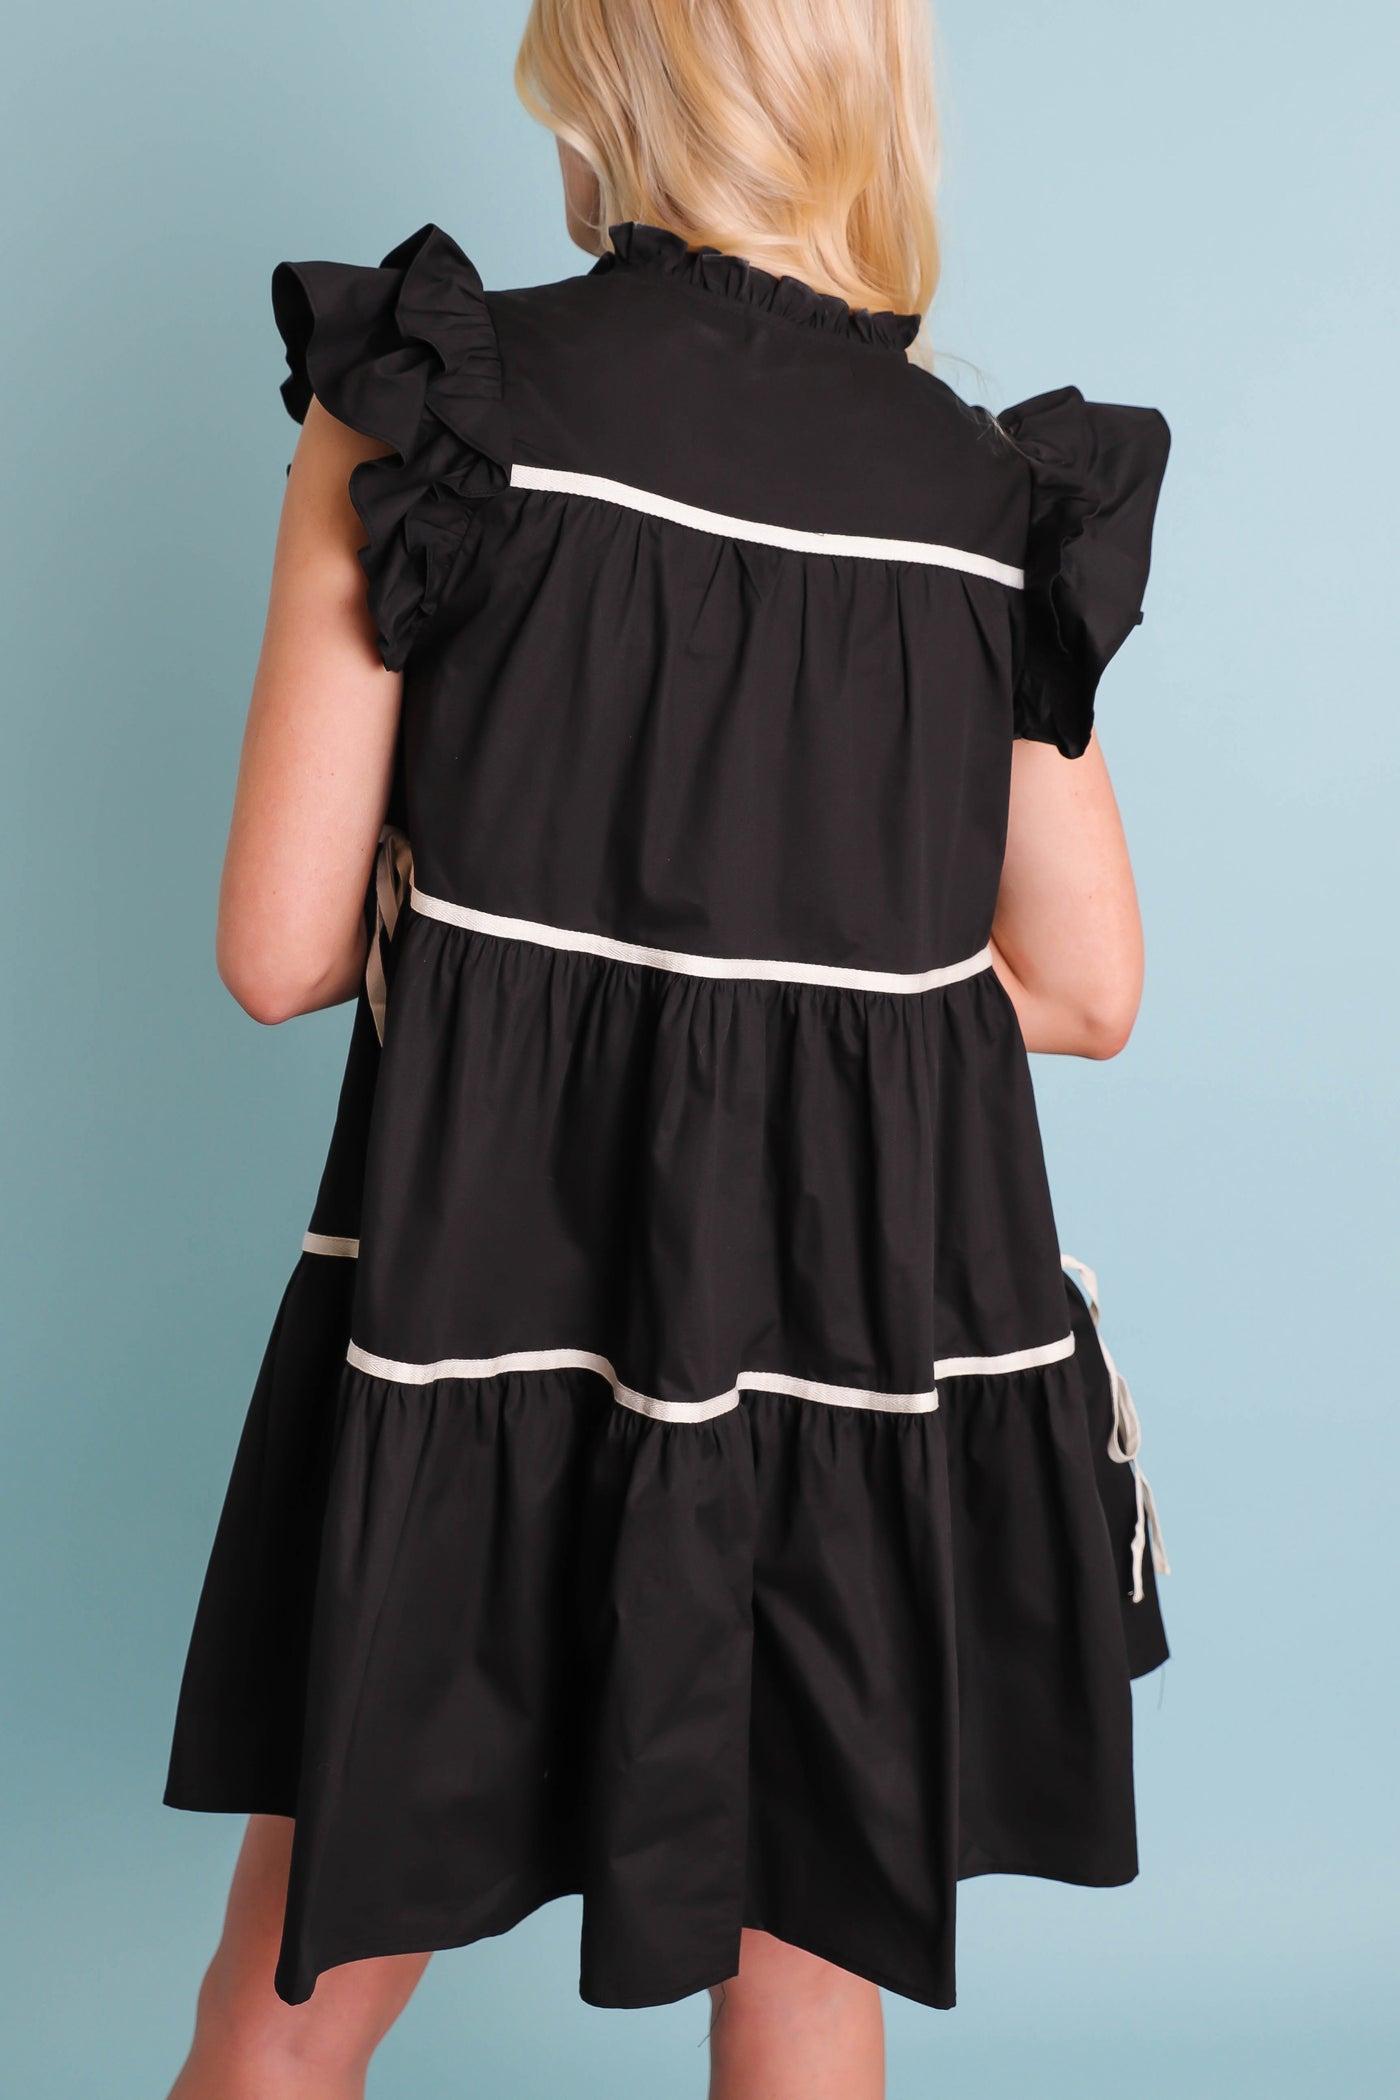 Women's Black Button Down Dress- Chic High End Dress with Ruffle Sleeves- Sofie The Label Dress